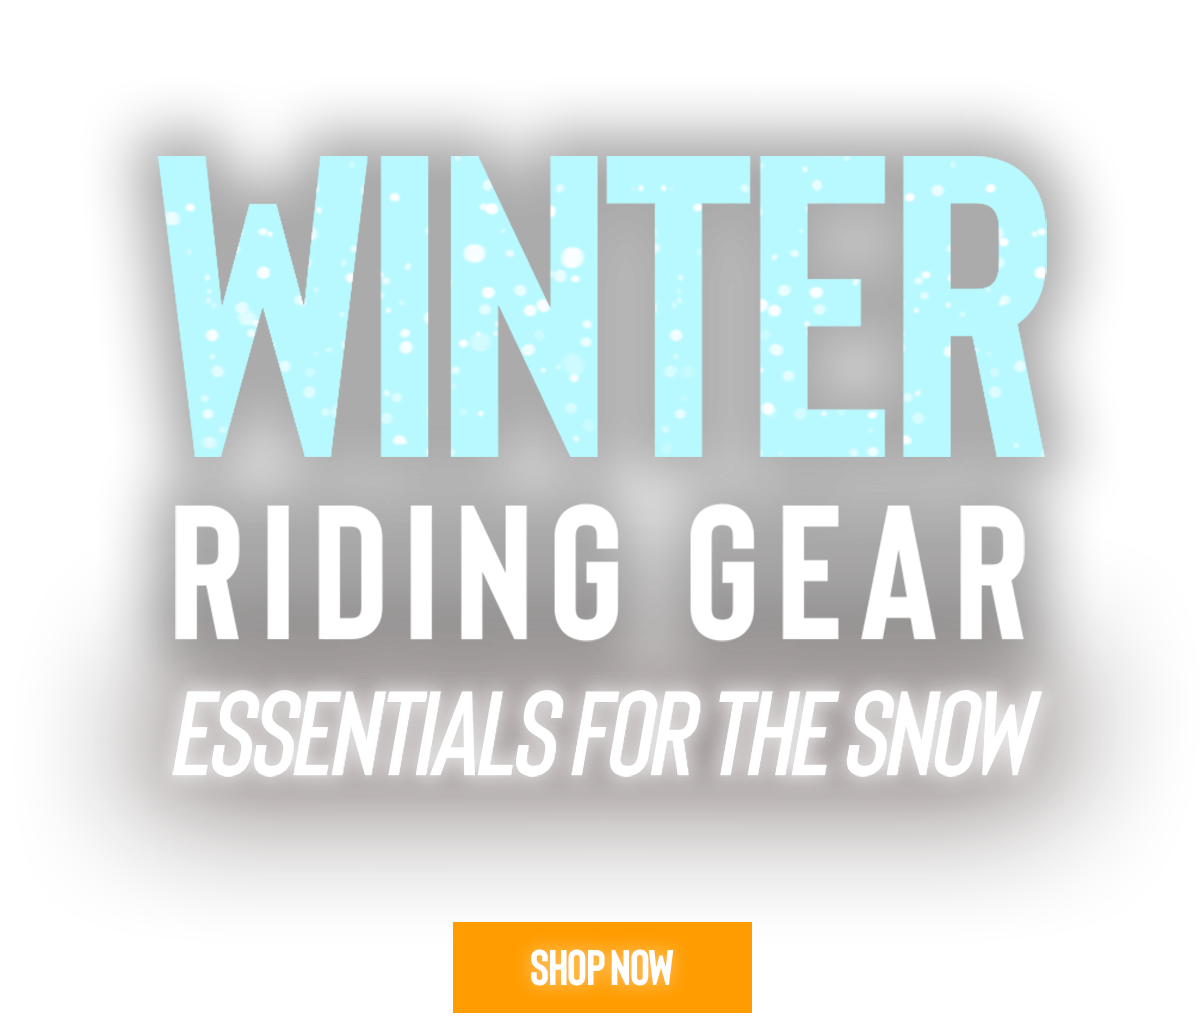 Winter Riding Gear Essentials For The Snow